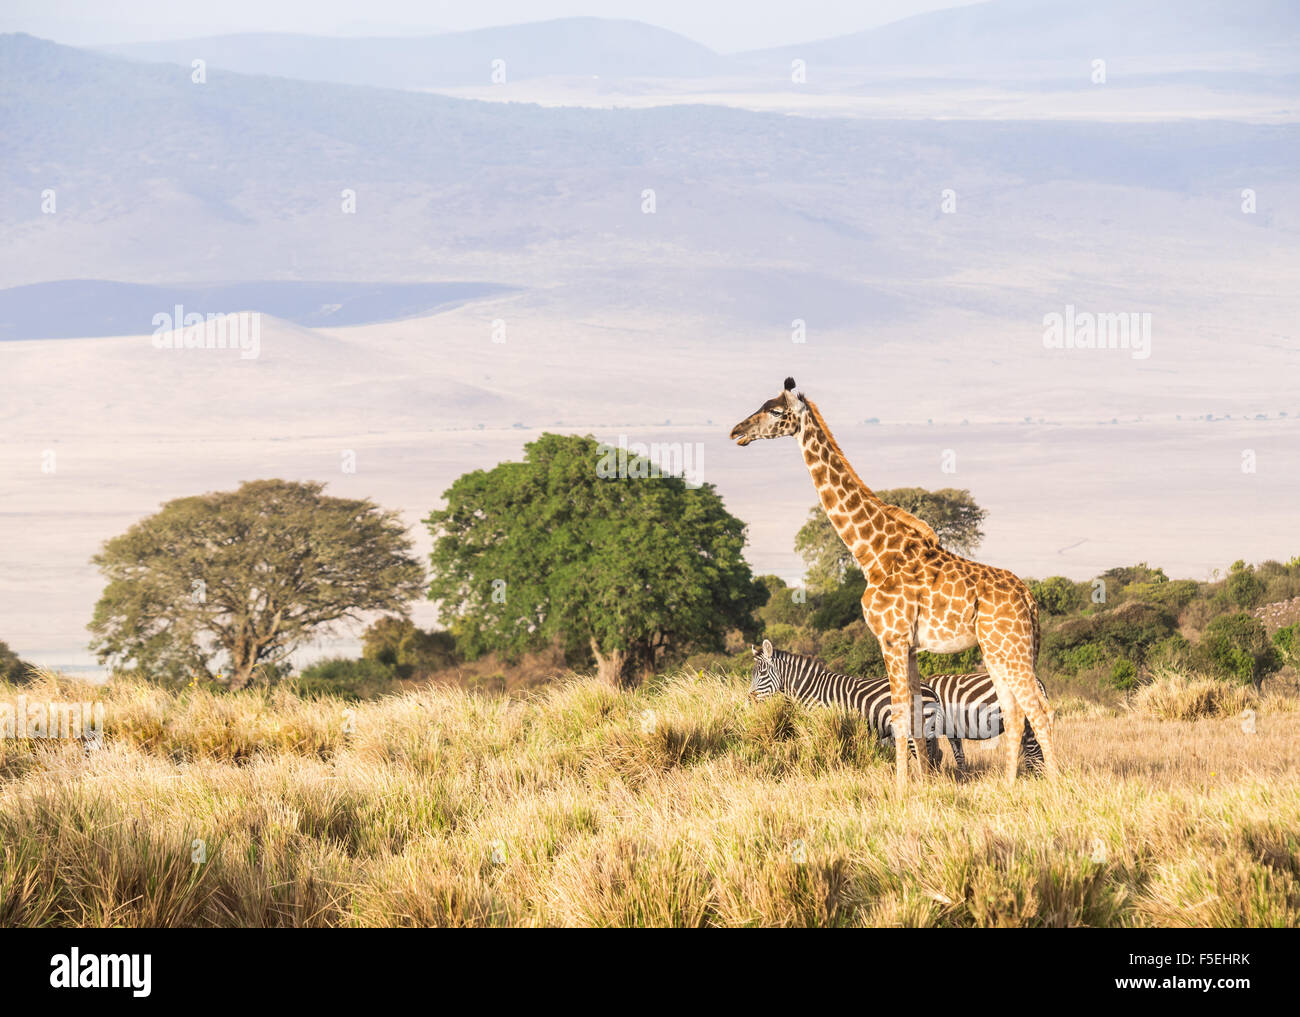 Giraffe and zebras on the rim of the Ngorongoro Crater in Tanzania, Africa, at sunset. Stock Photo